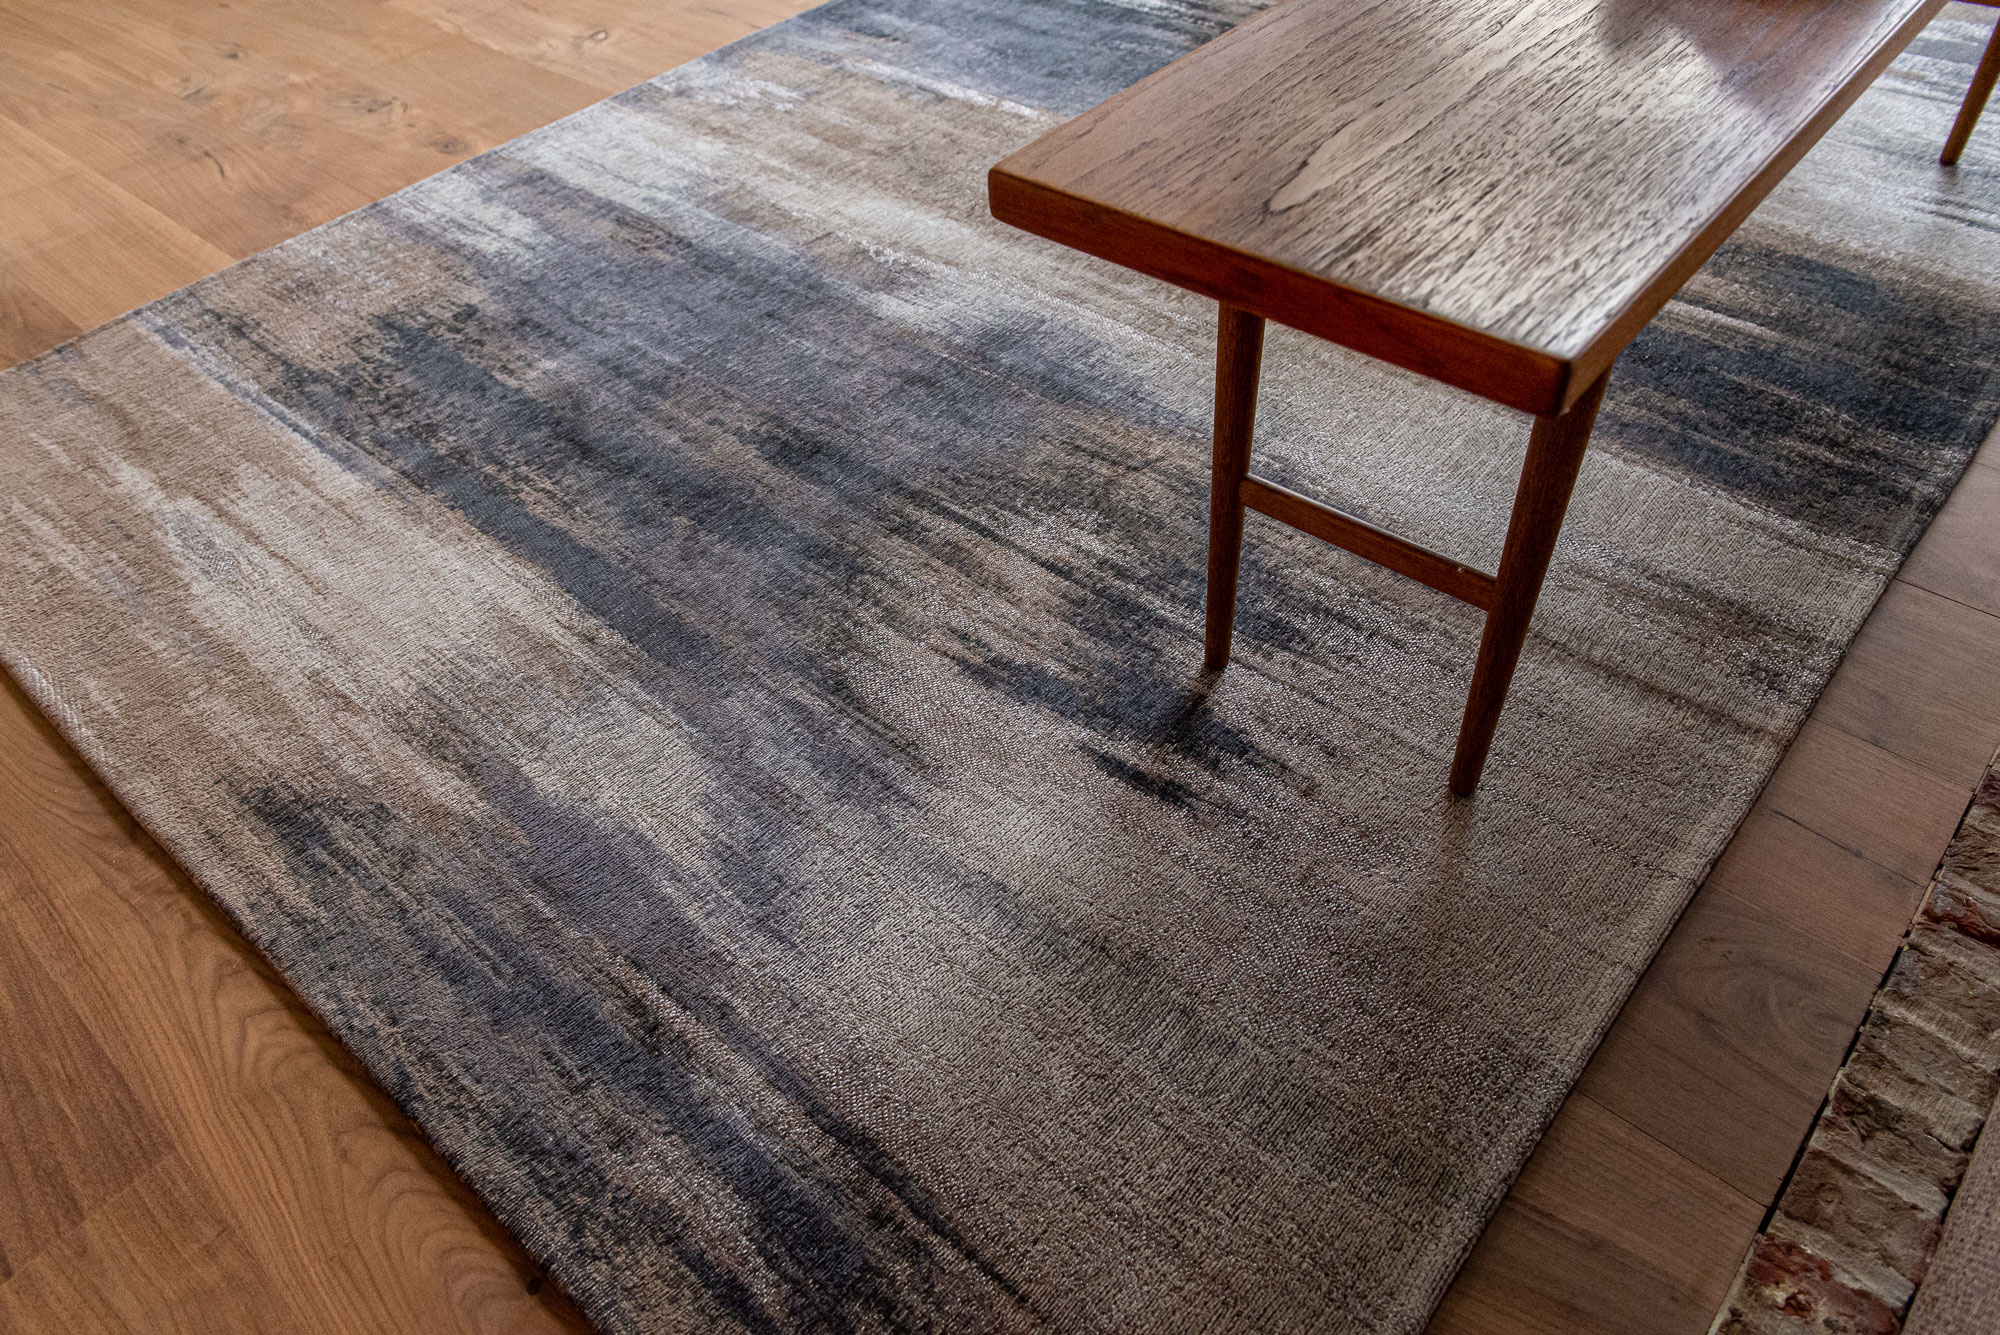 Abstract Flatwoven Beige Rug ☞ Size: 2' 7" x 5' (80 x 150 cm)